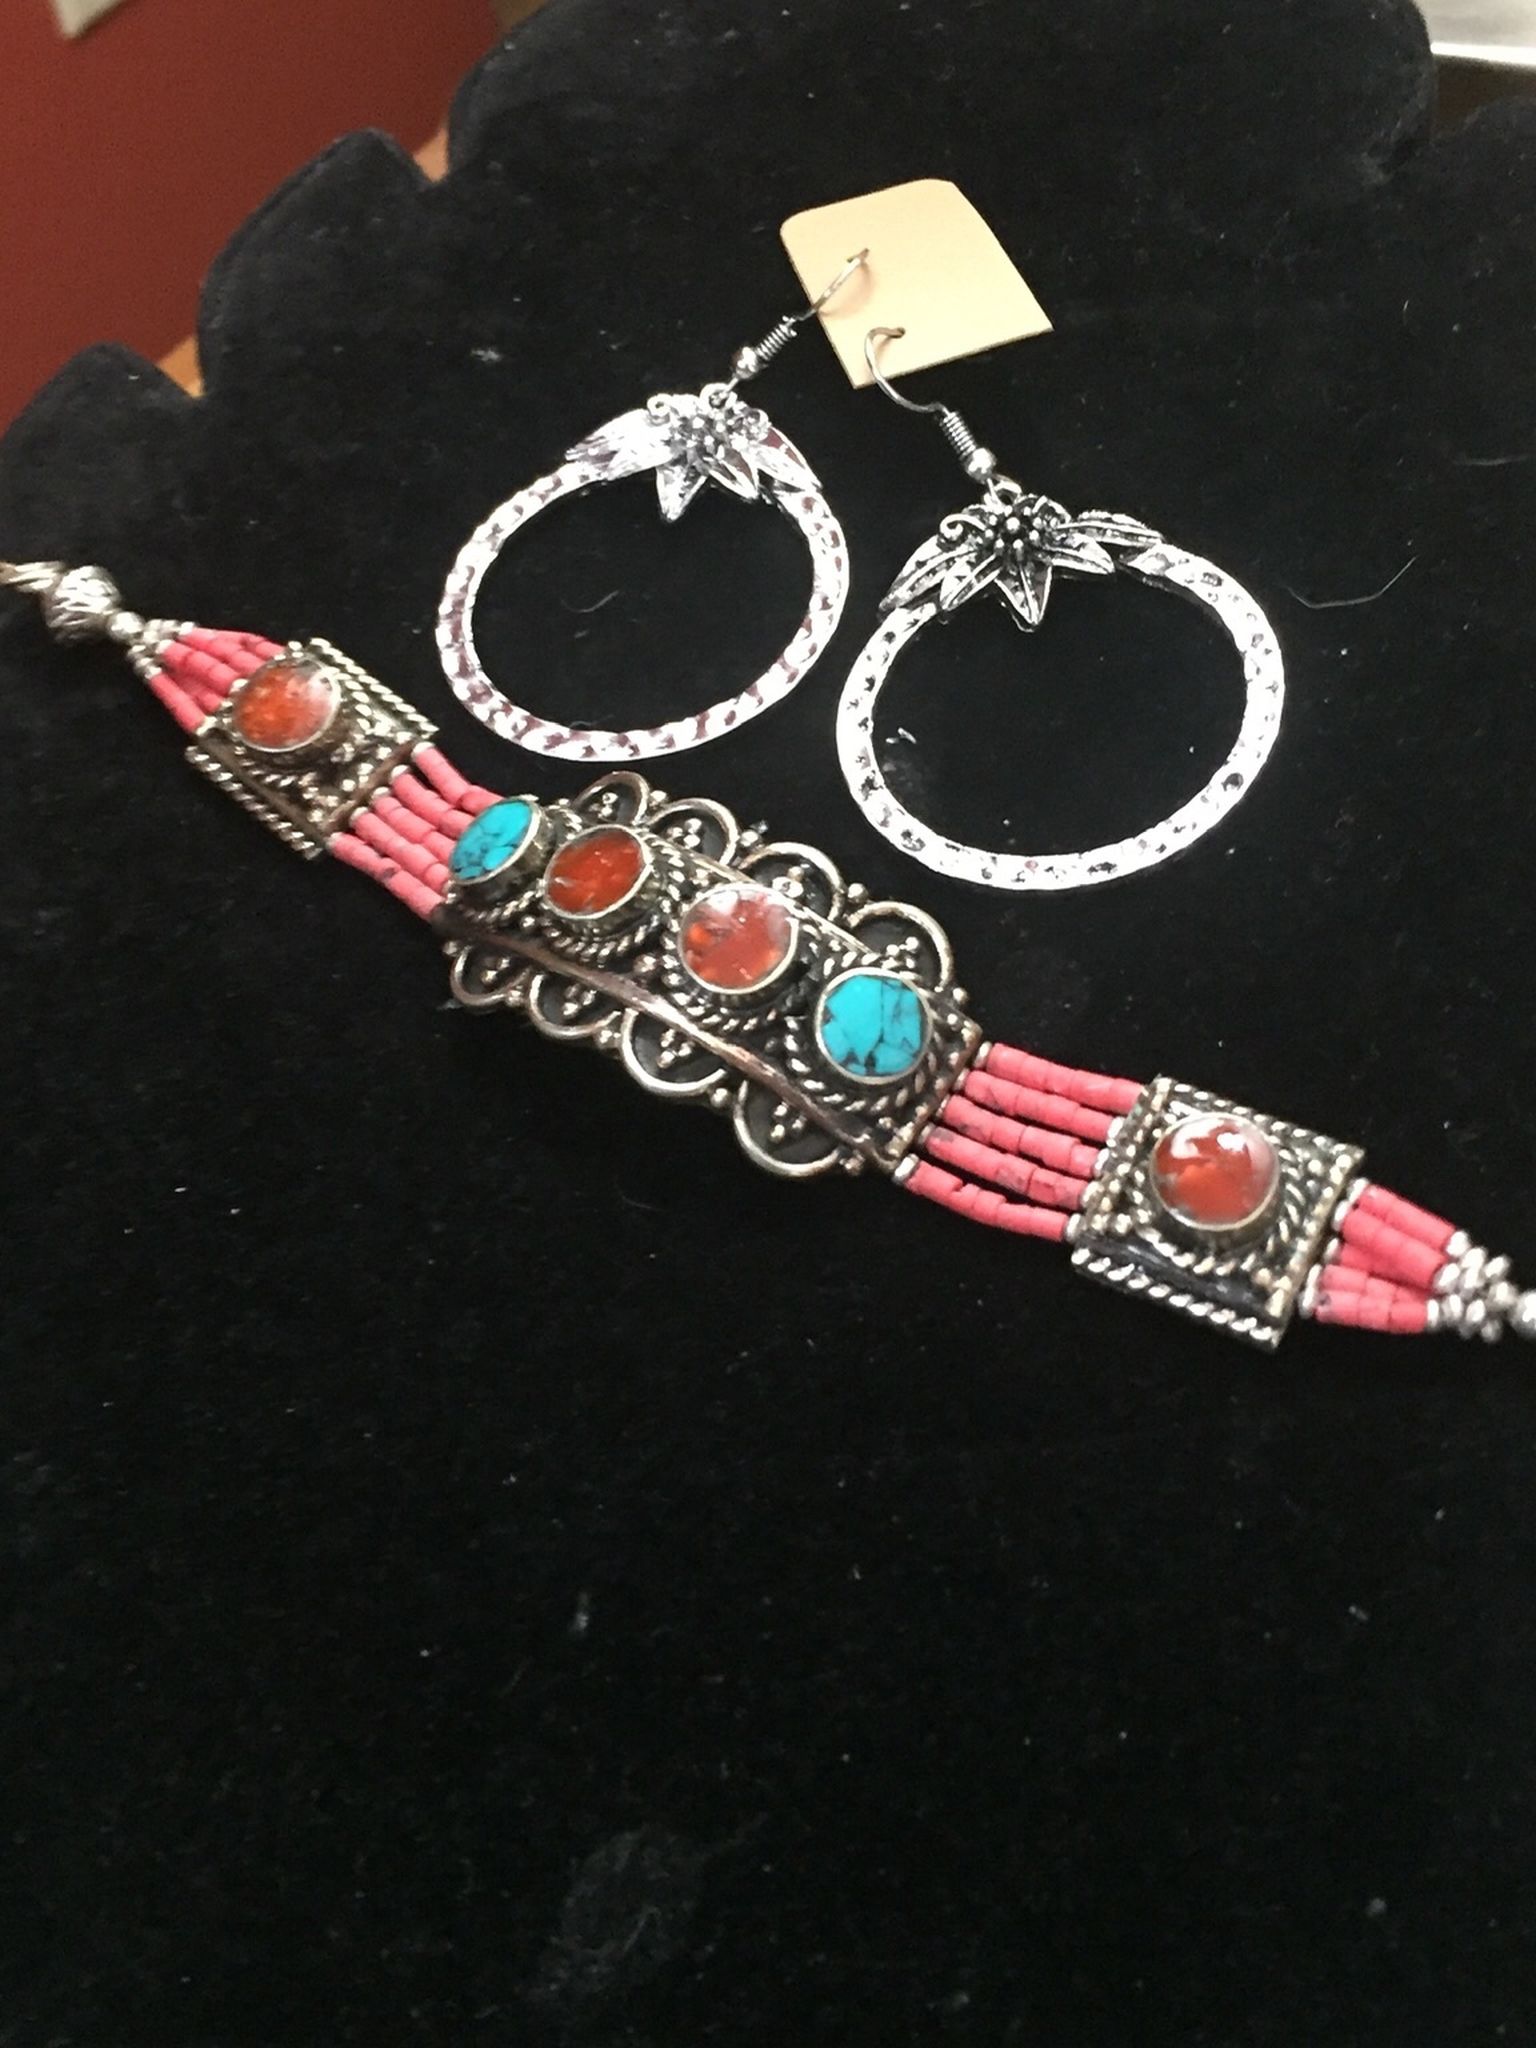 Stunning .925 Coral And Turquoise Bracelet With Earrings